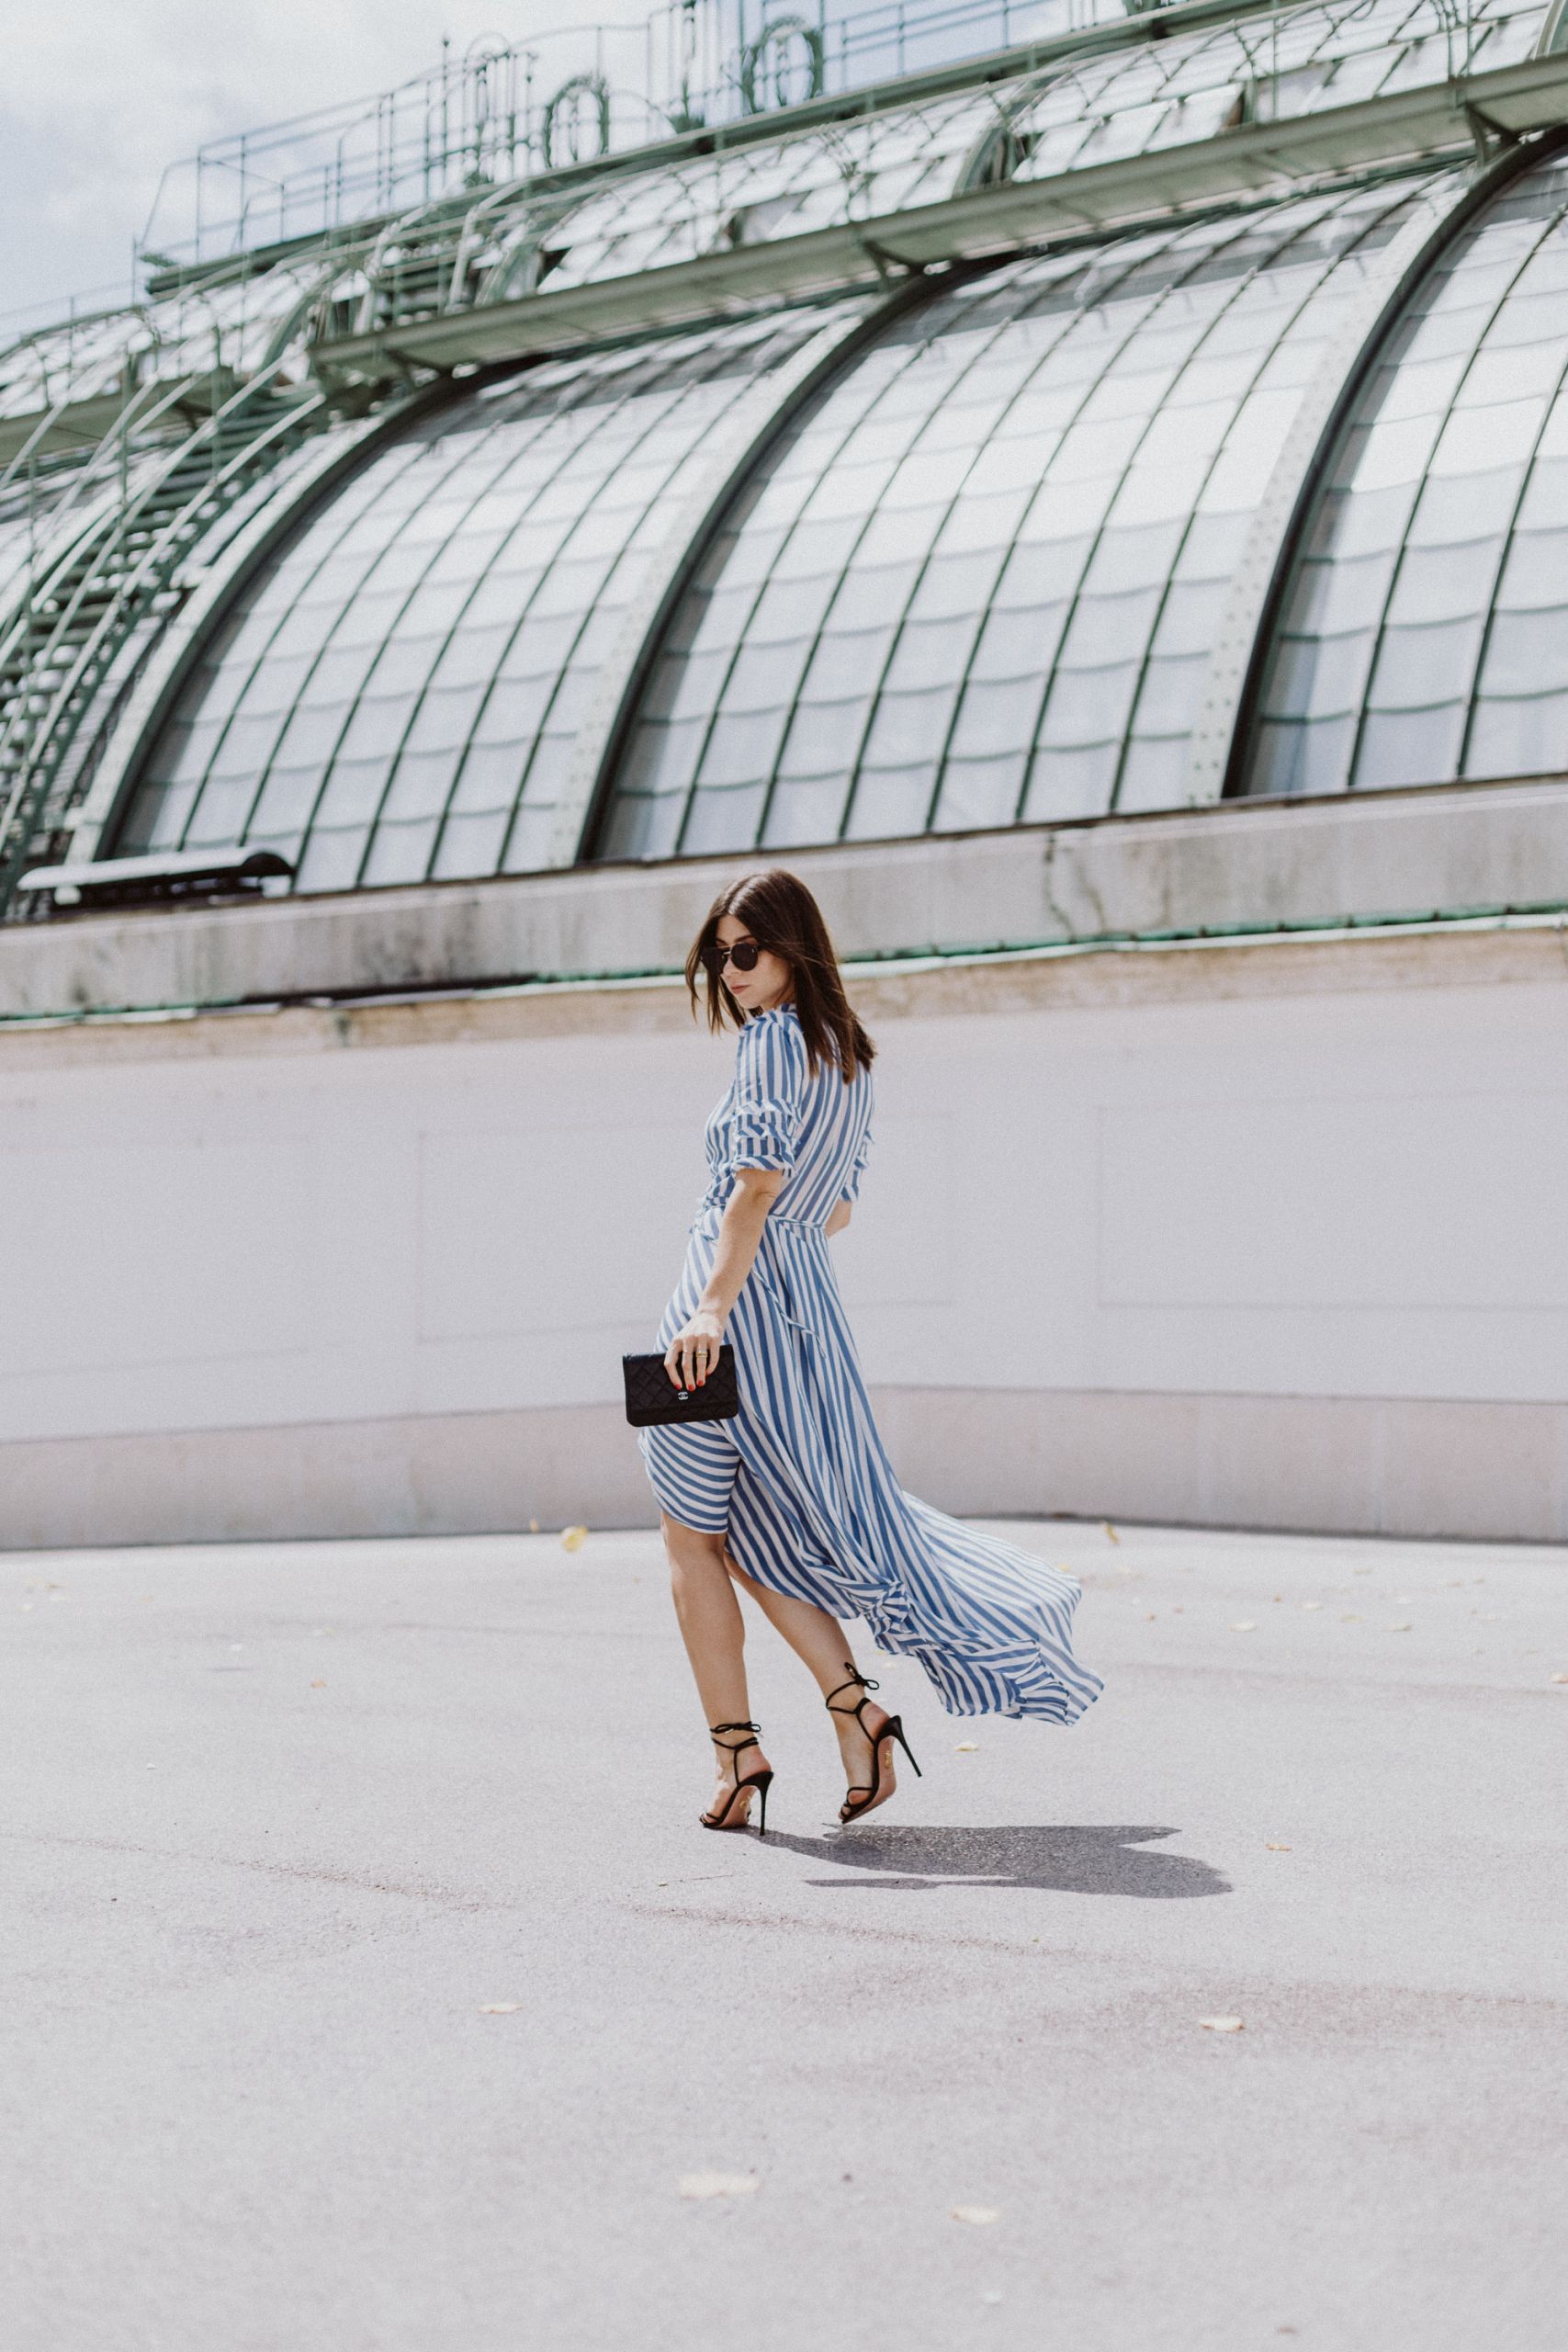 Wedding Guest Attire | The Daily Dose